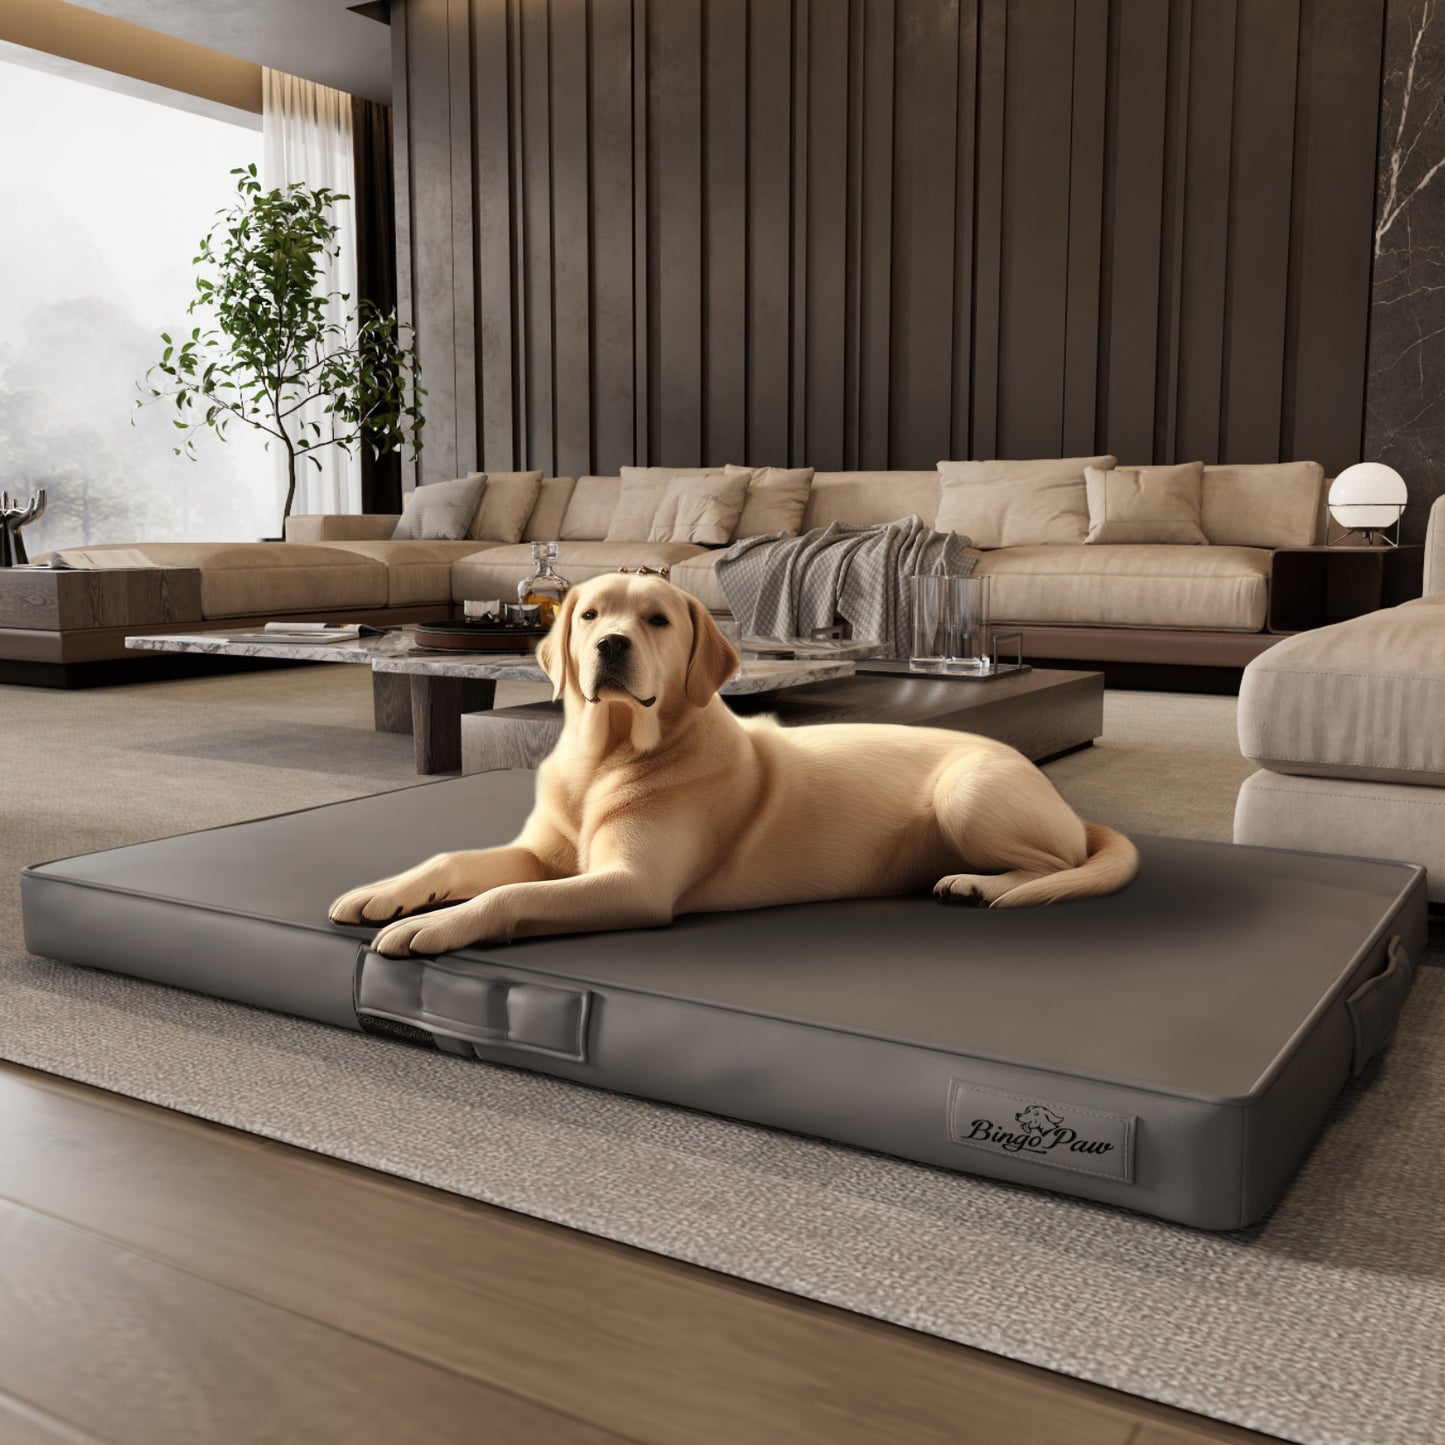 Innovative Pet Bed: Waterproof Dog Pet Pillow Bed Microfiber Leather Orthopedic 3D Superfiber Cushion Foldable Washable